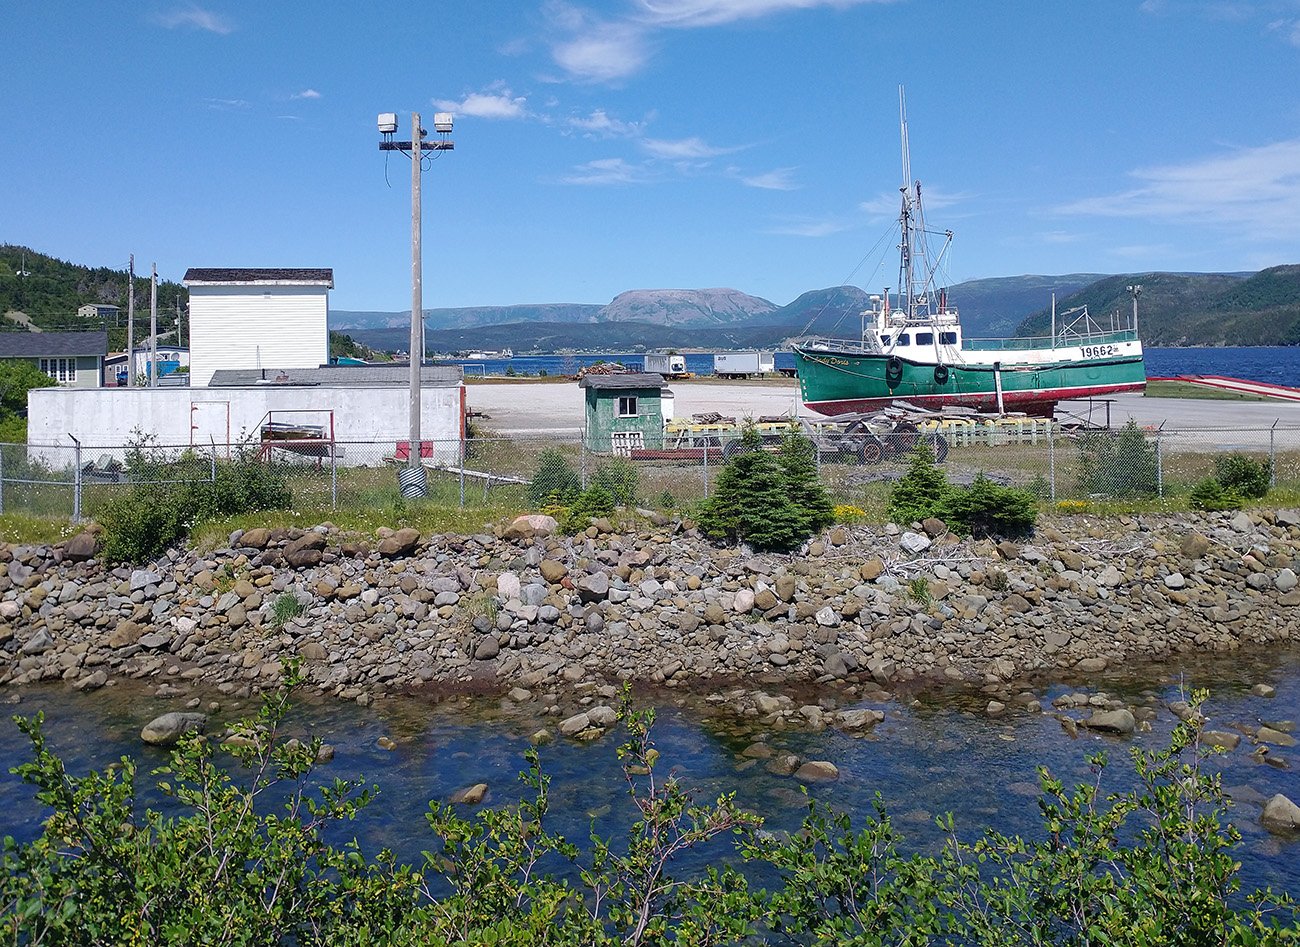 The ride passes through the small scenic town of Woody Point